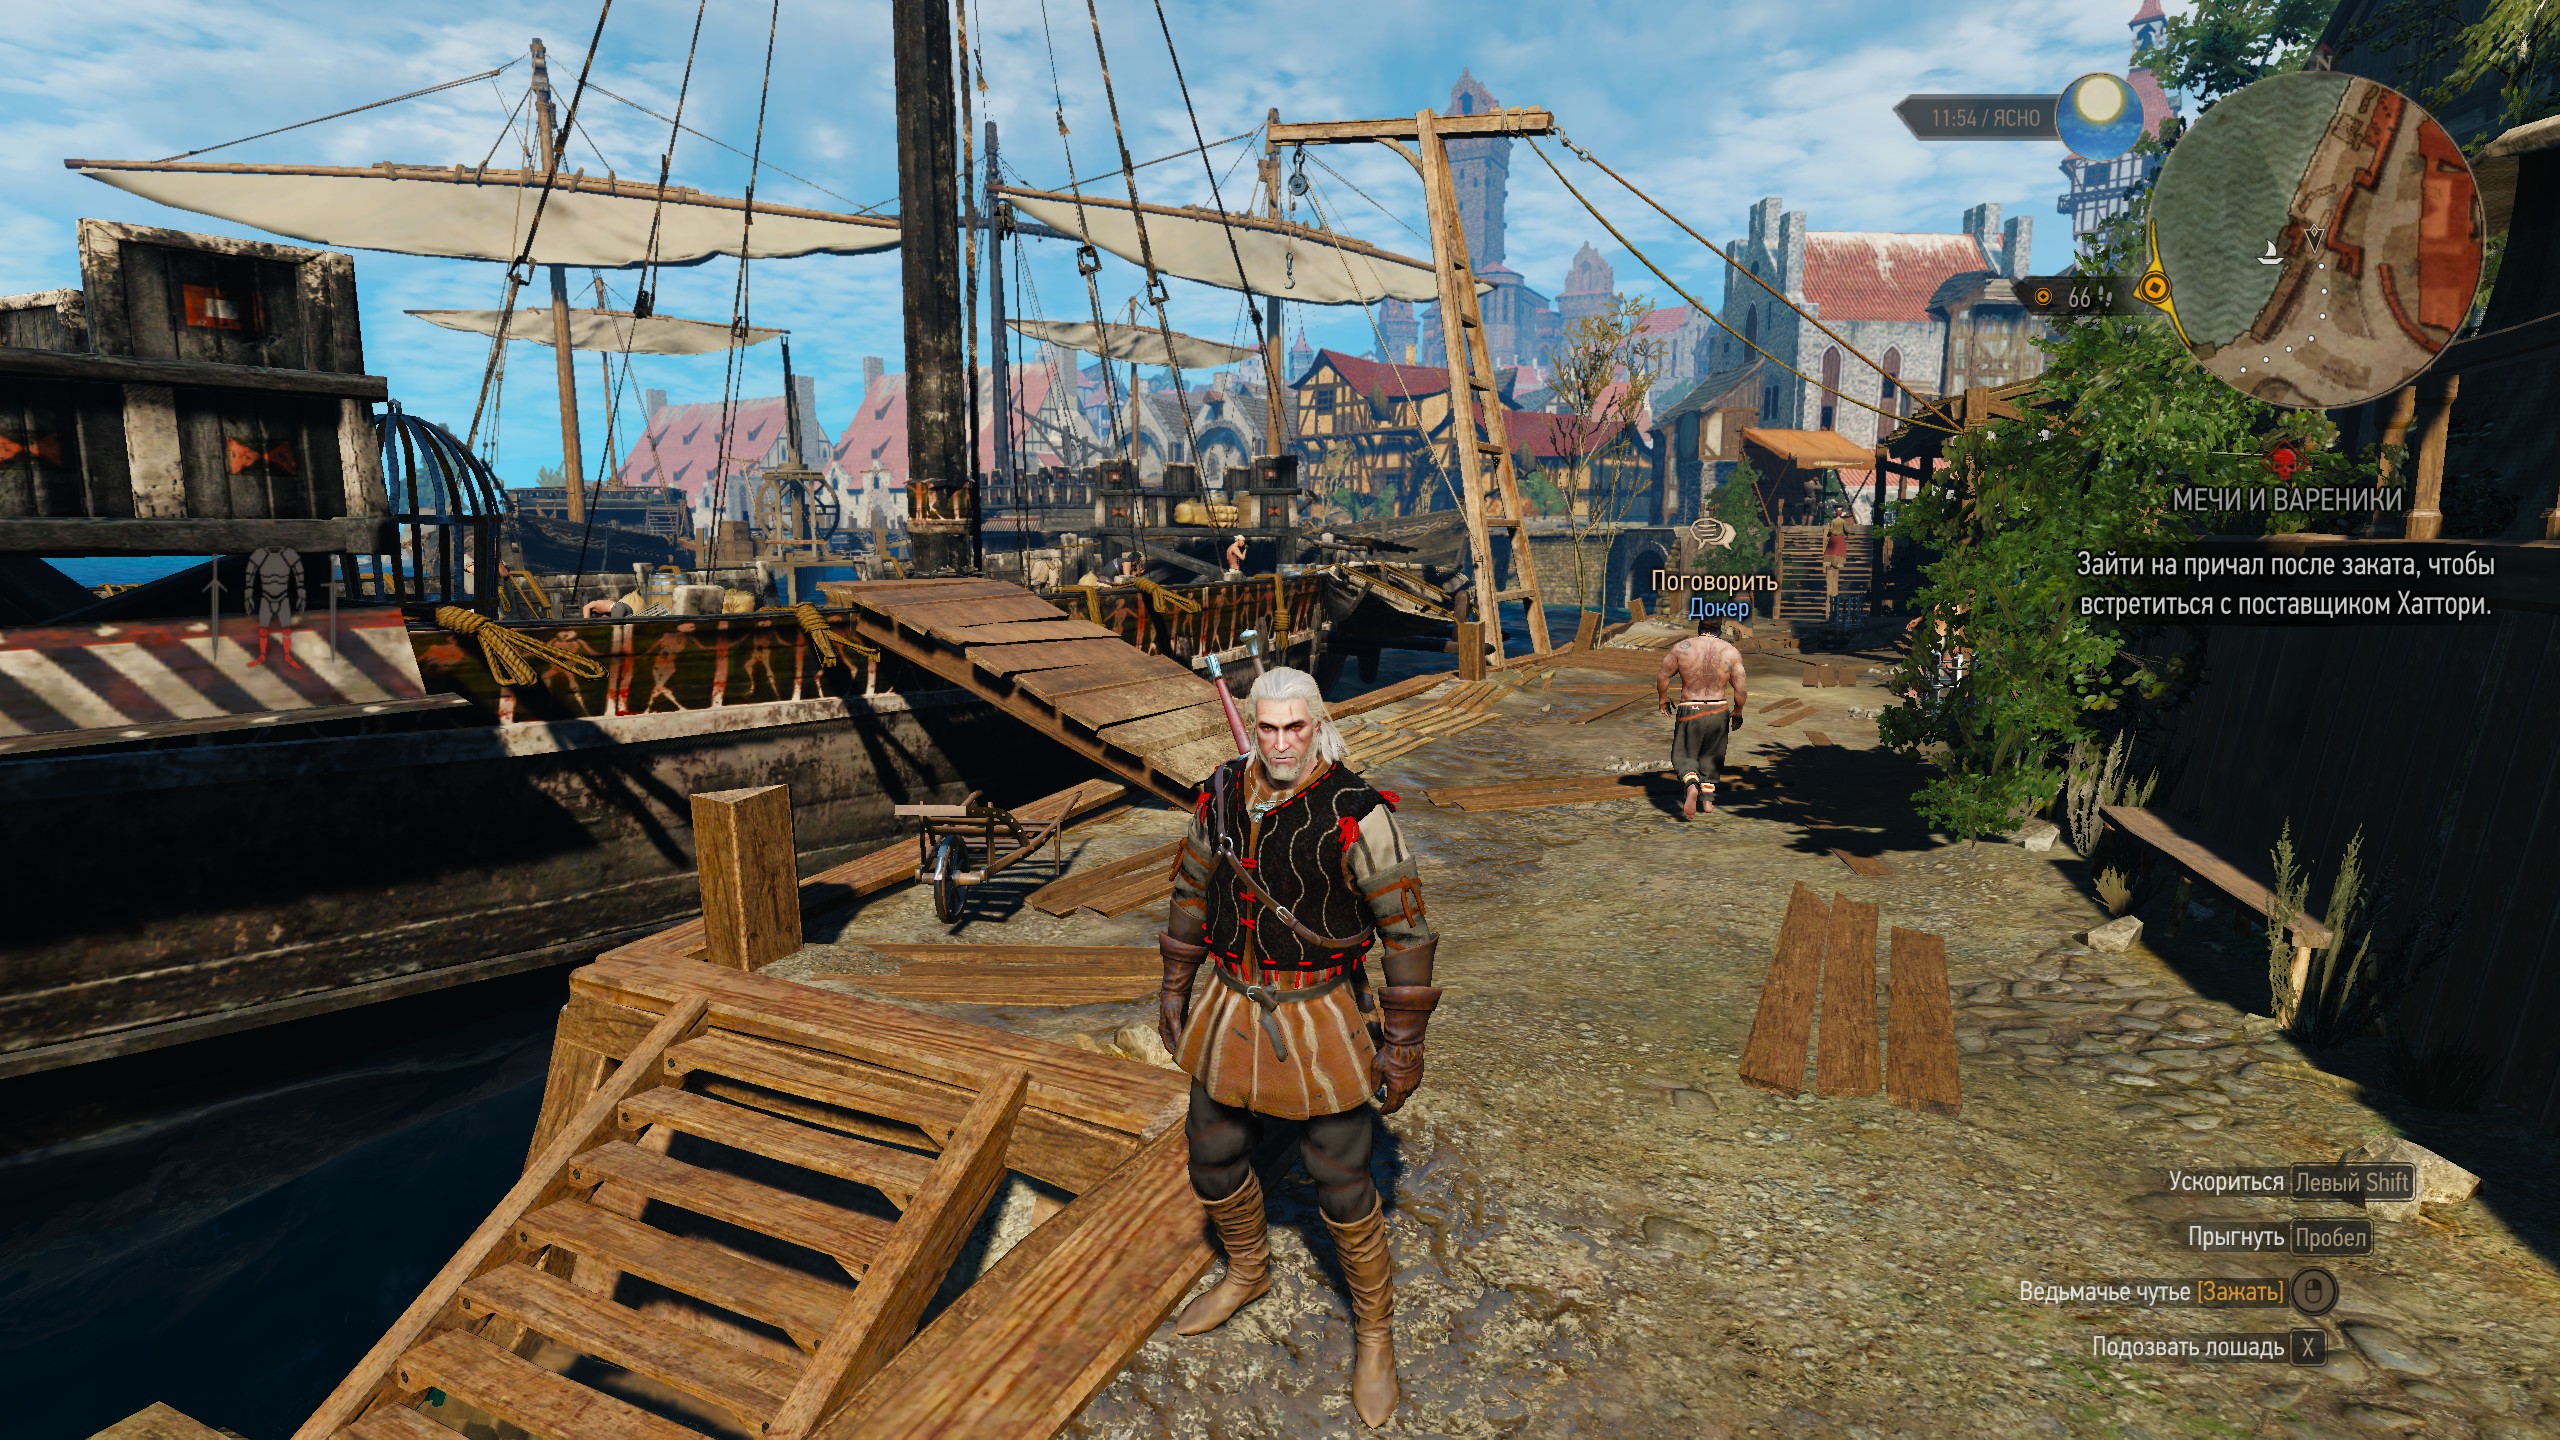 The Witcher 3: Wild Hunt Optimized Graphics settings for significantly higher FPS